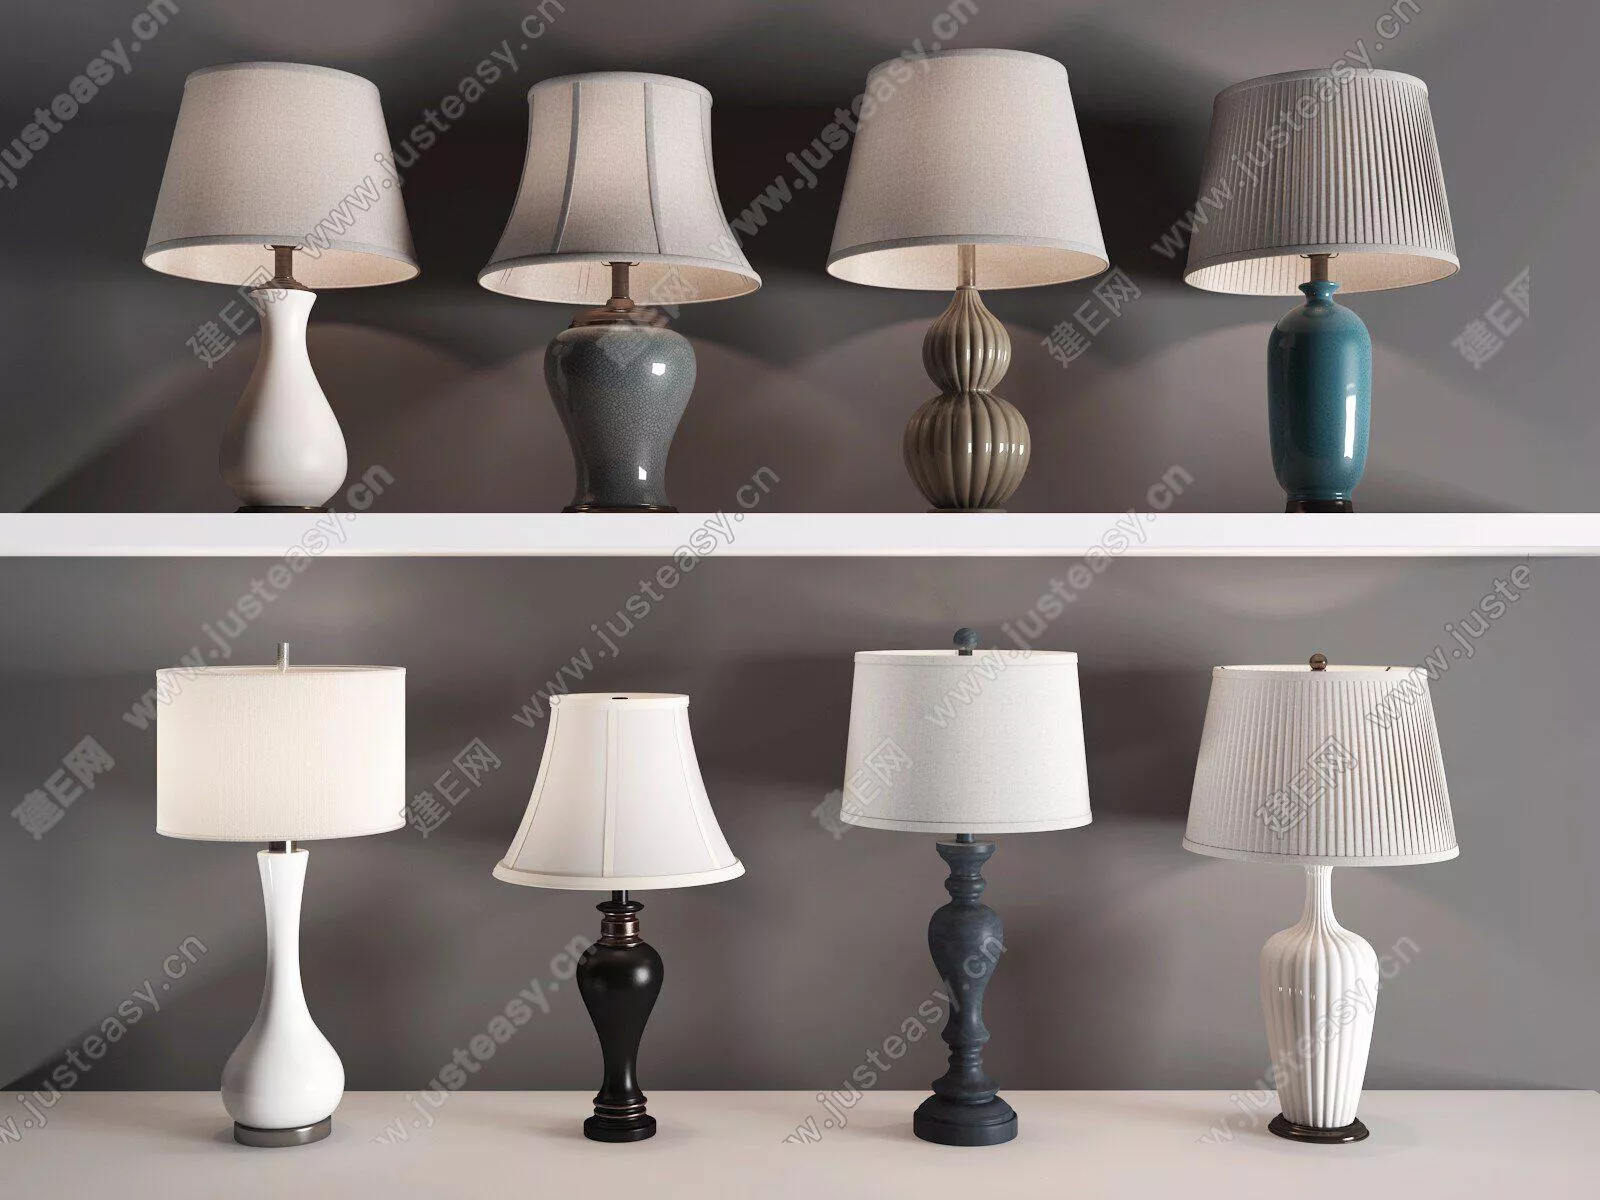 CHINESE TABLE LAMP - SKETCHUP 3D MODEL - ENSCAPE - 111889790